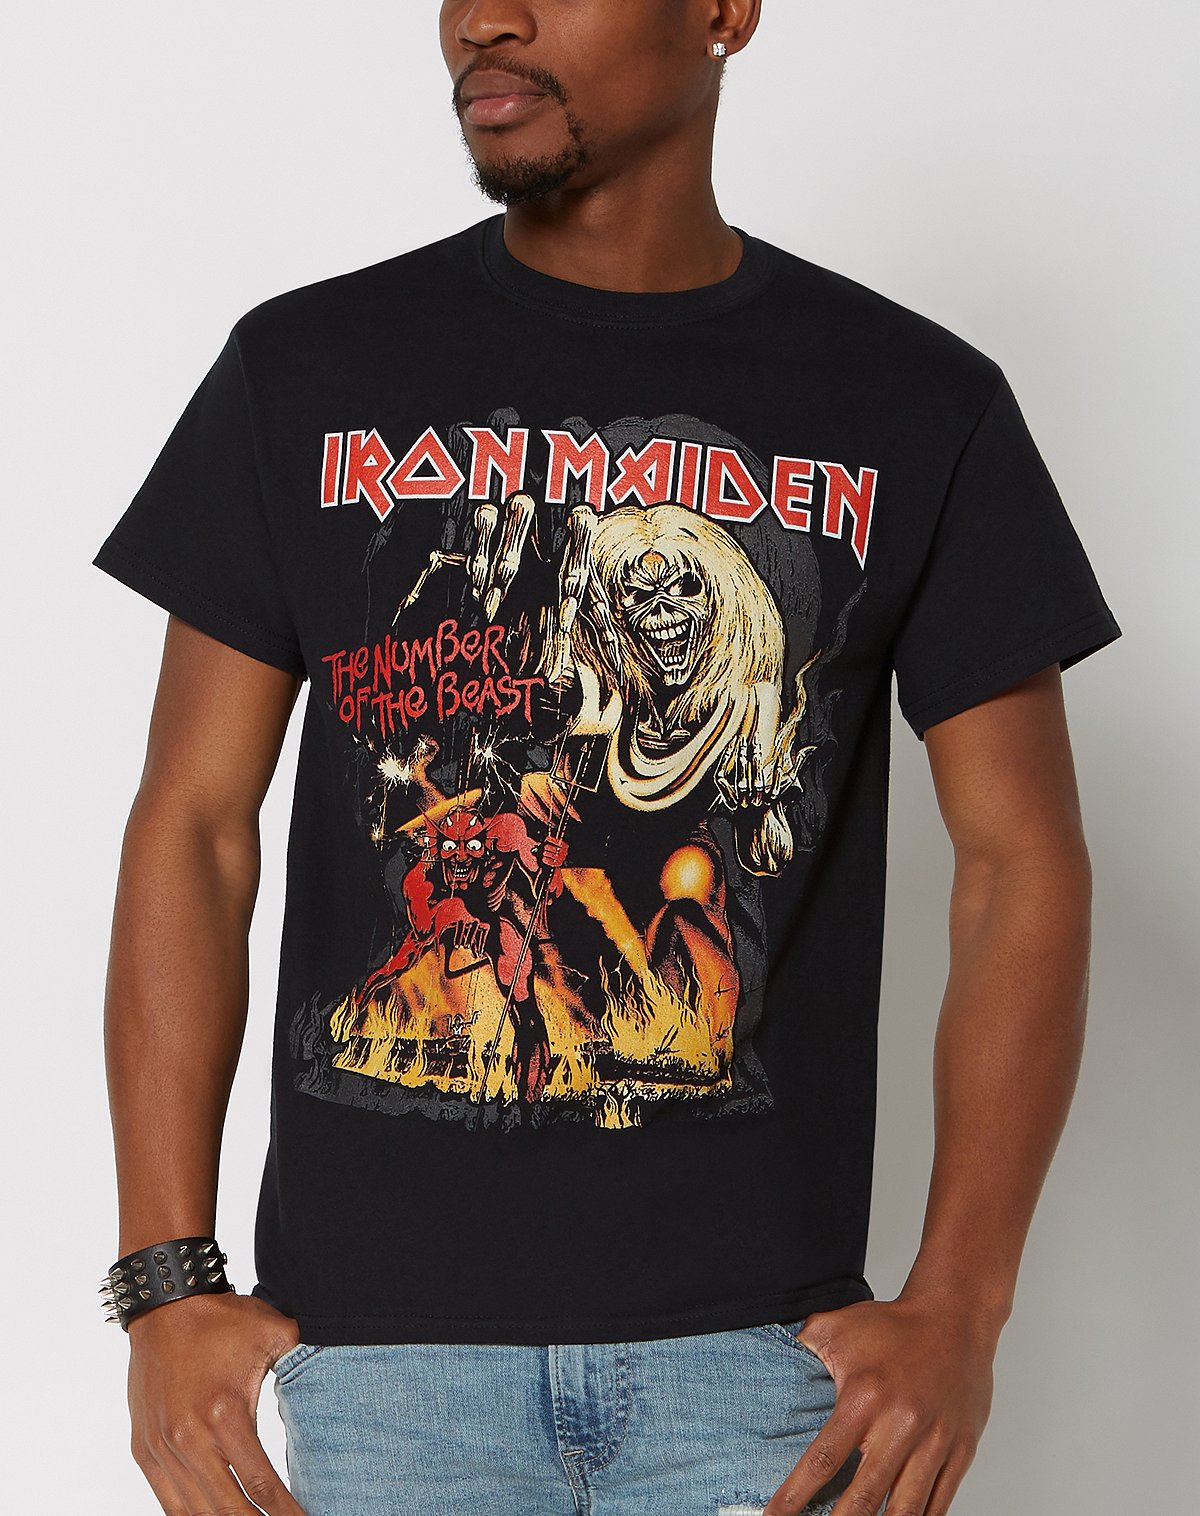 The Number of the Beast T Shirt – Iron Maiden